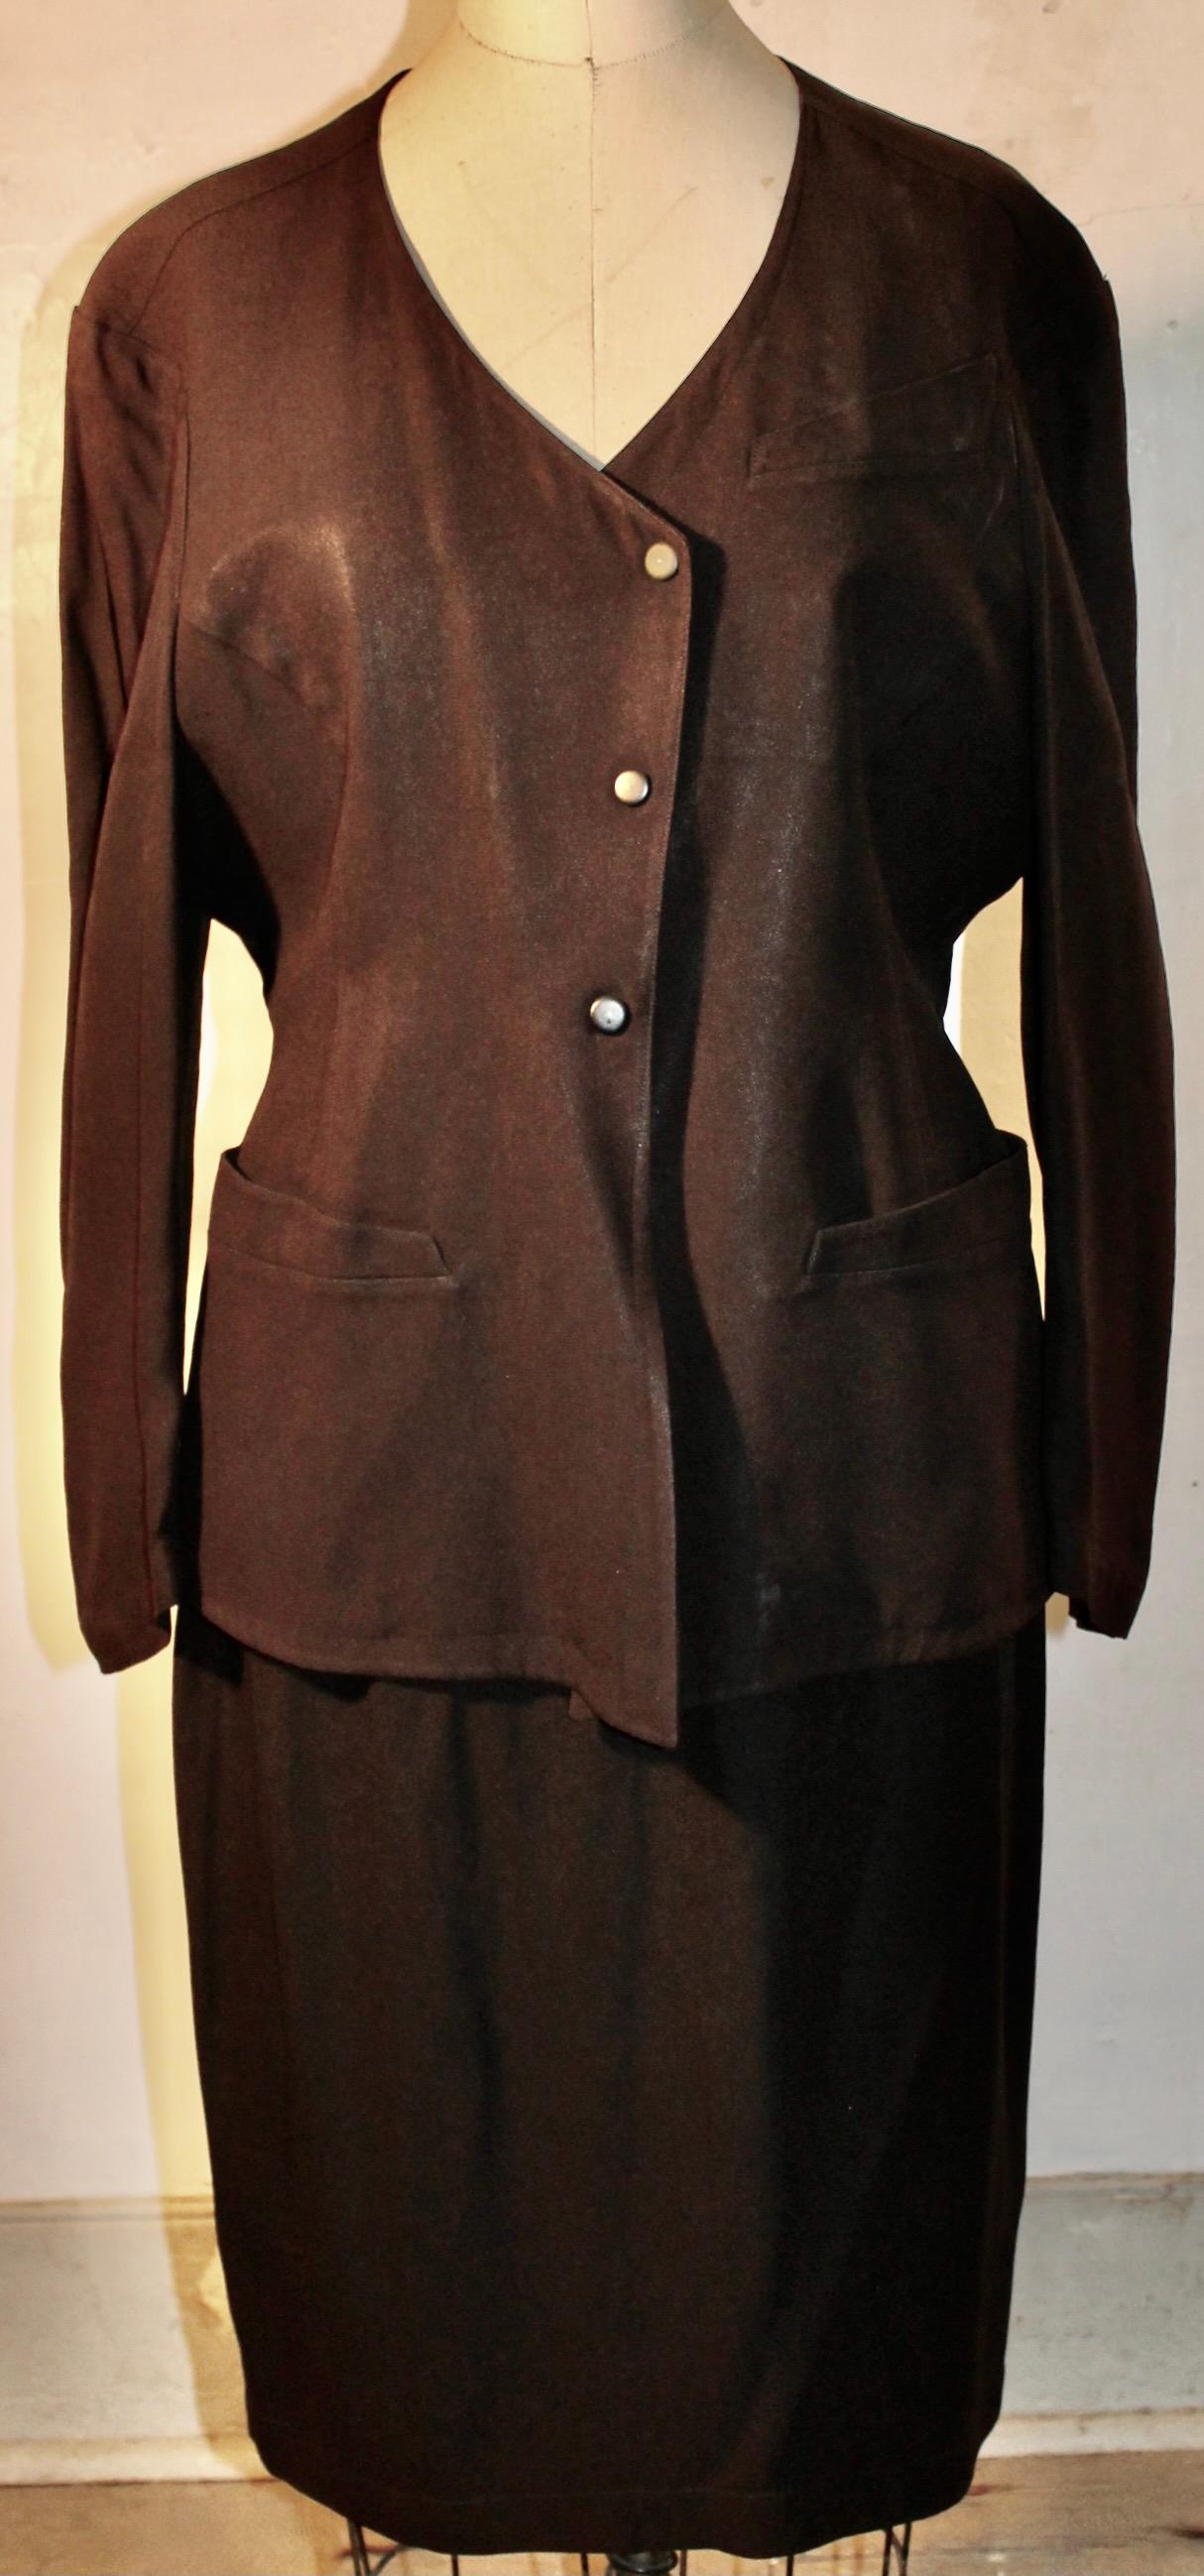 Thierry Mugler Paris Eggplant Skirt Suit In Good Condition For Sale In Sharon, CT